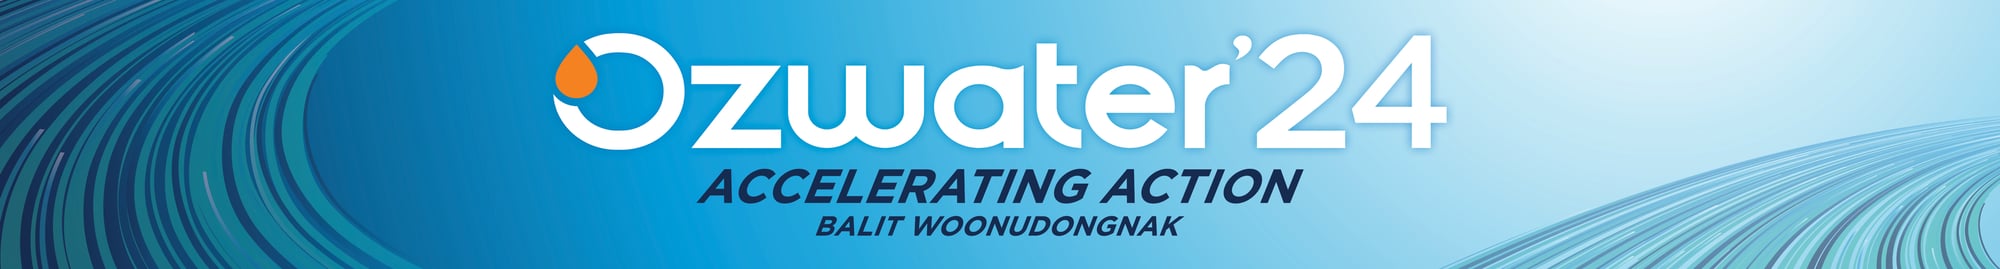 web banners_generic ozwater245